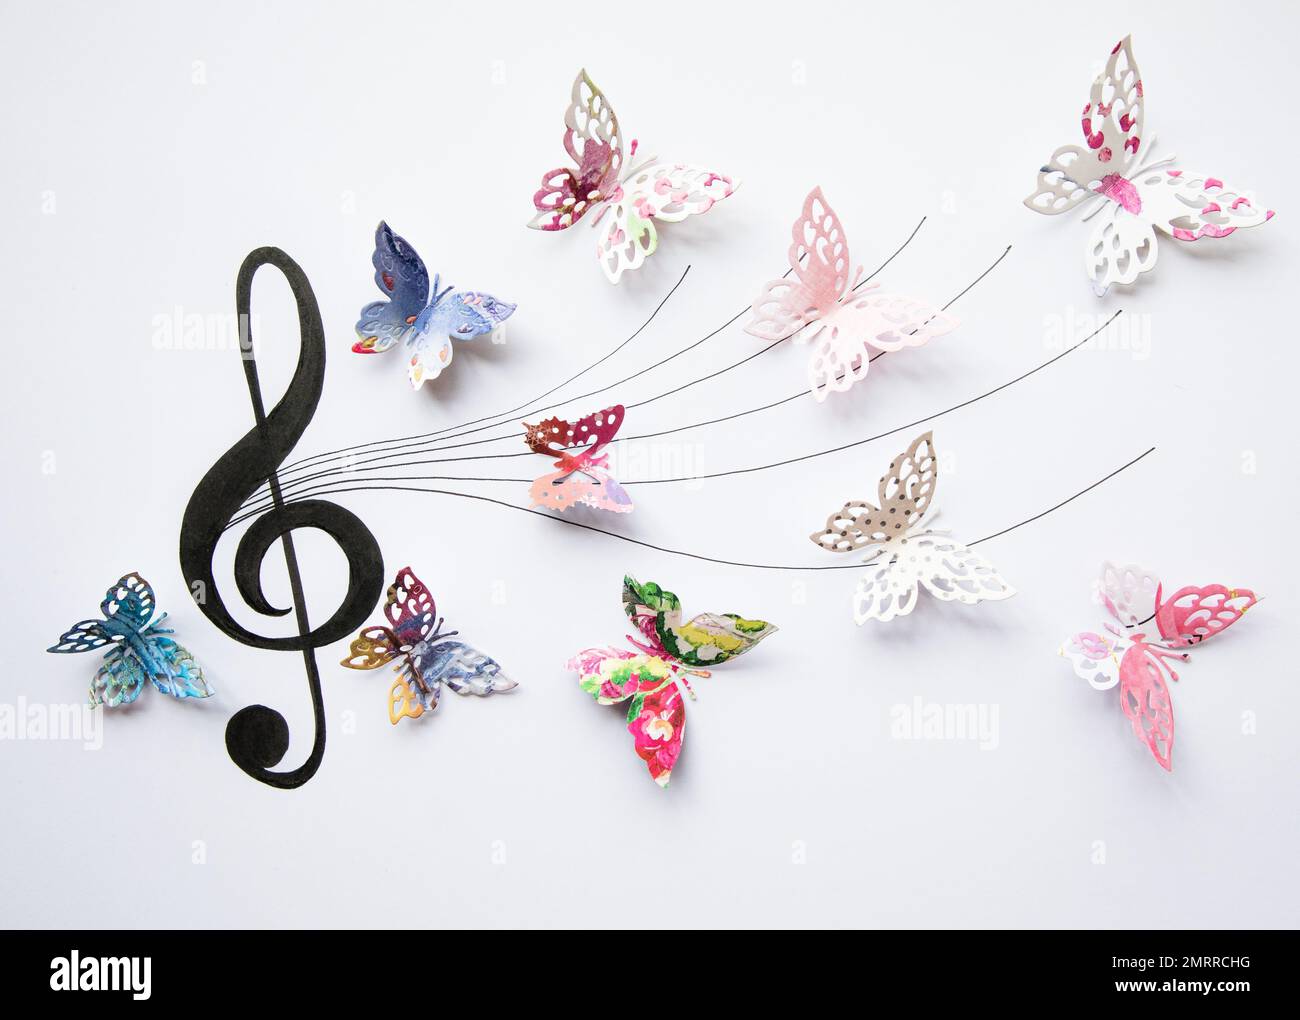 A closeup of colorful paper cut out butterflies eminating from an artistic musical staff Stock Photo